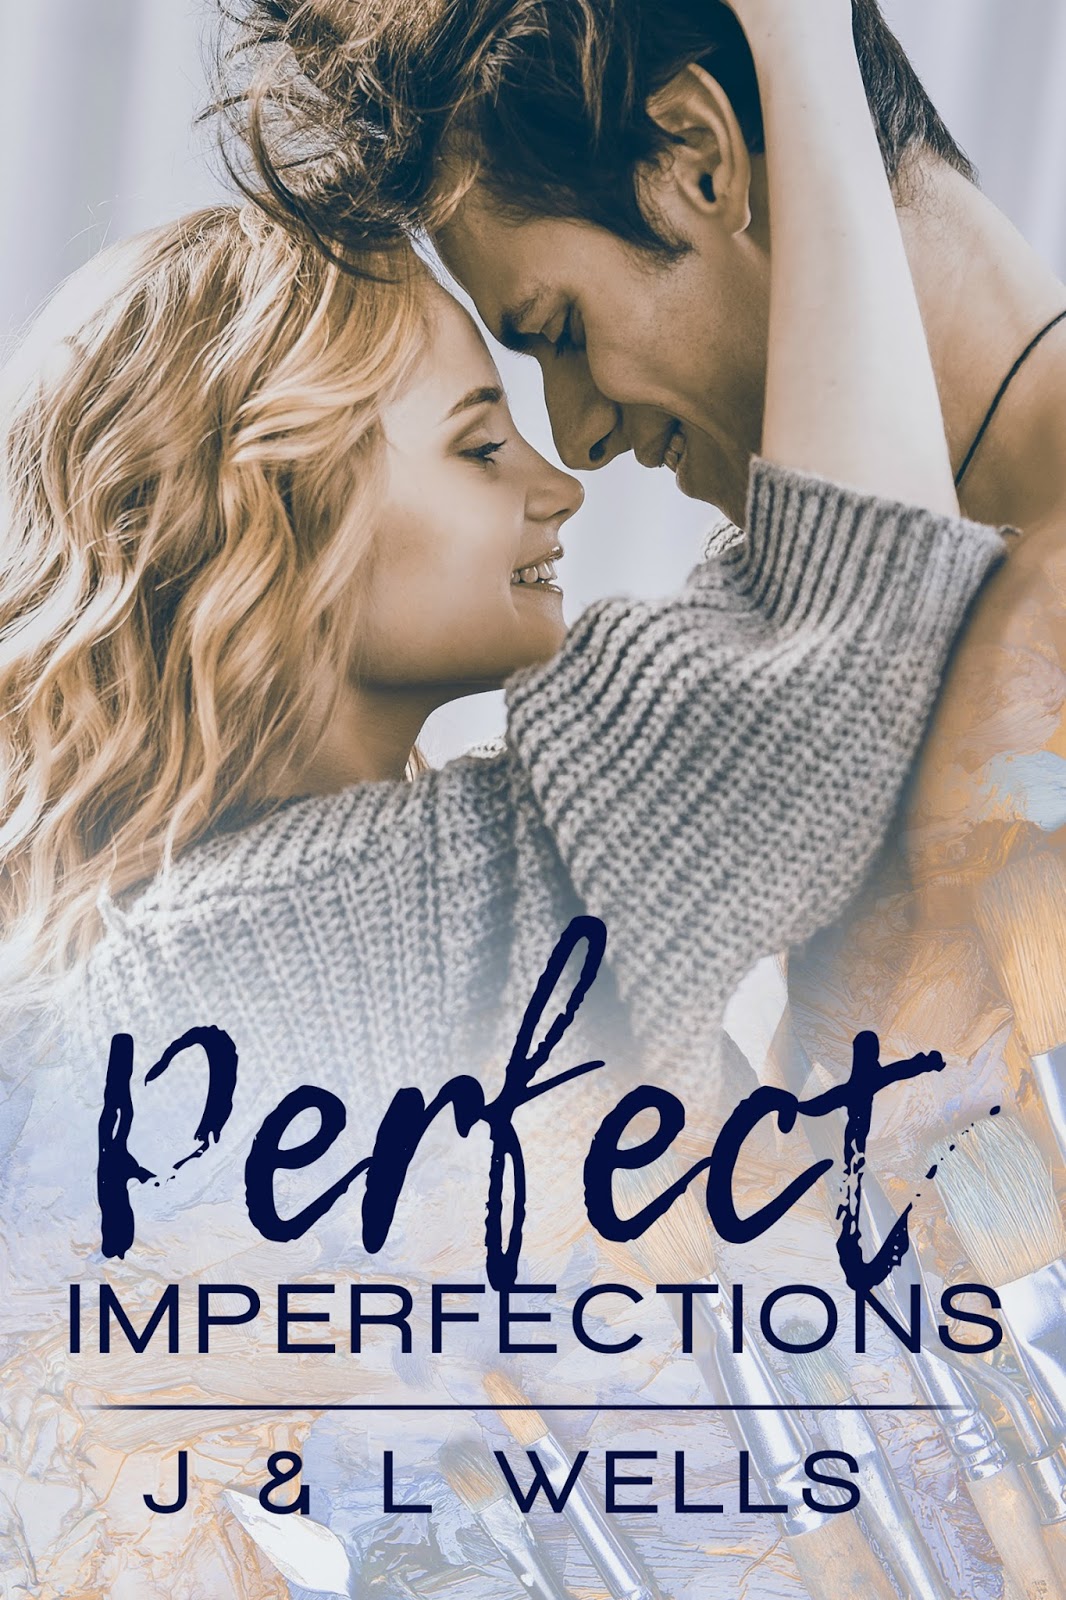 L can well. Perfect imperfection. Perfect Imperfect book. Little imperfections book.